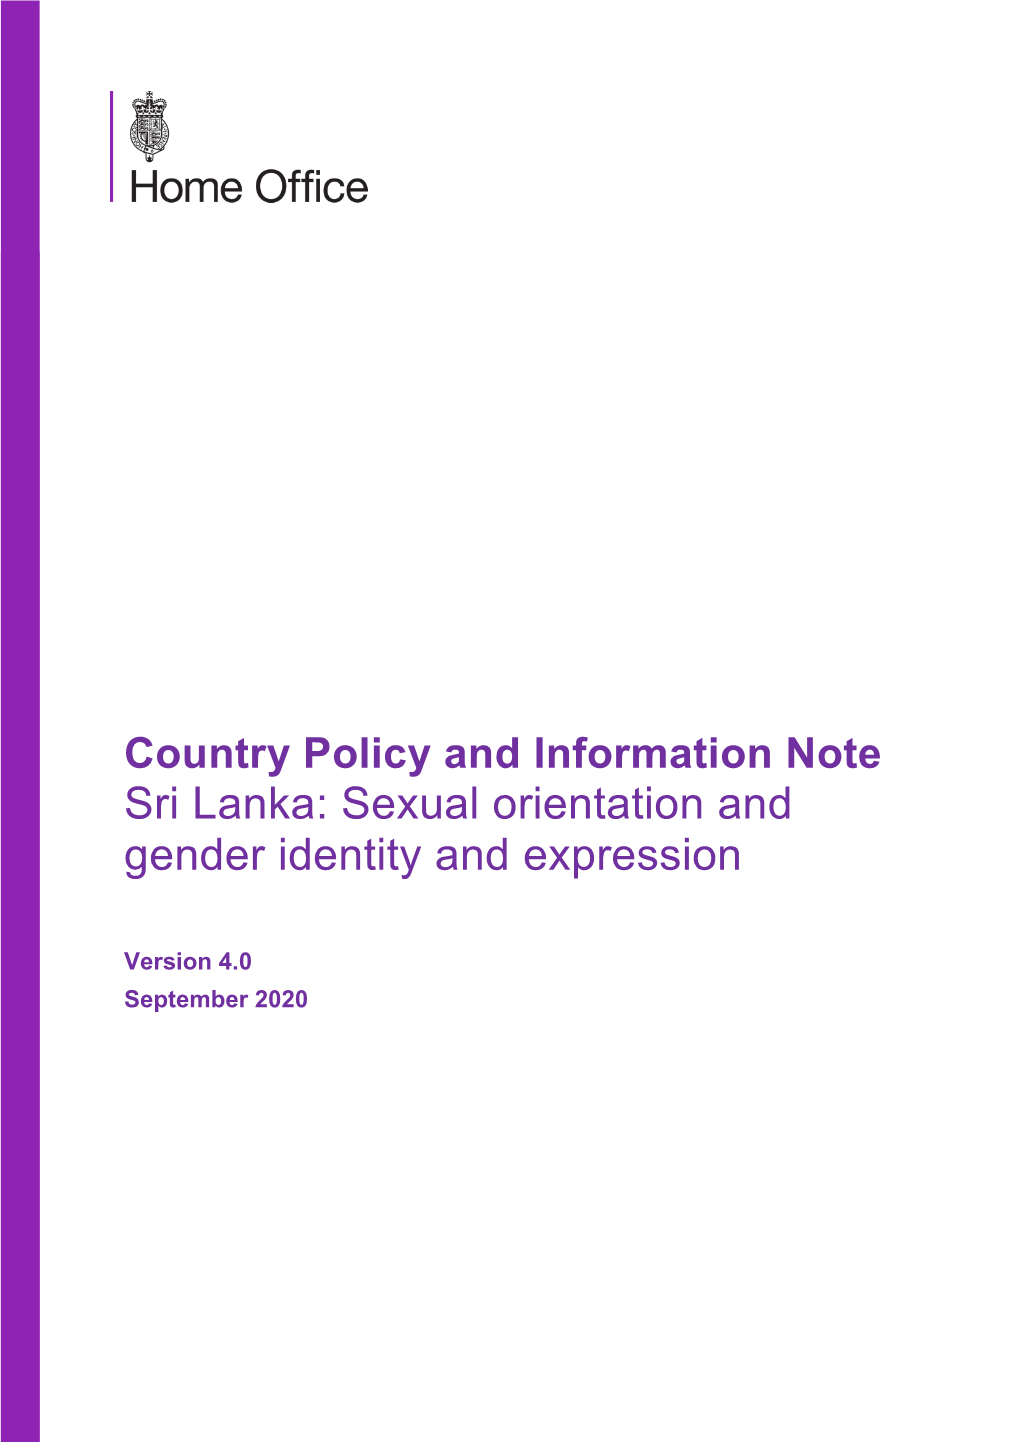 Country Policy and Information Note Sri Lanka: Sexual Orientation and Gender Identity and Expression